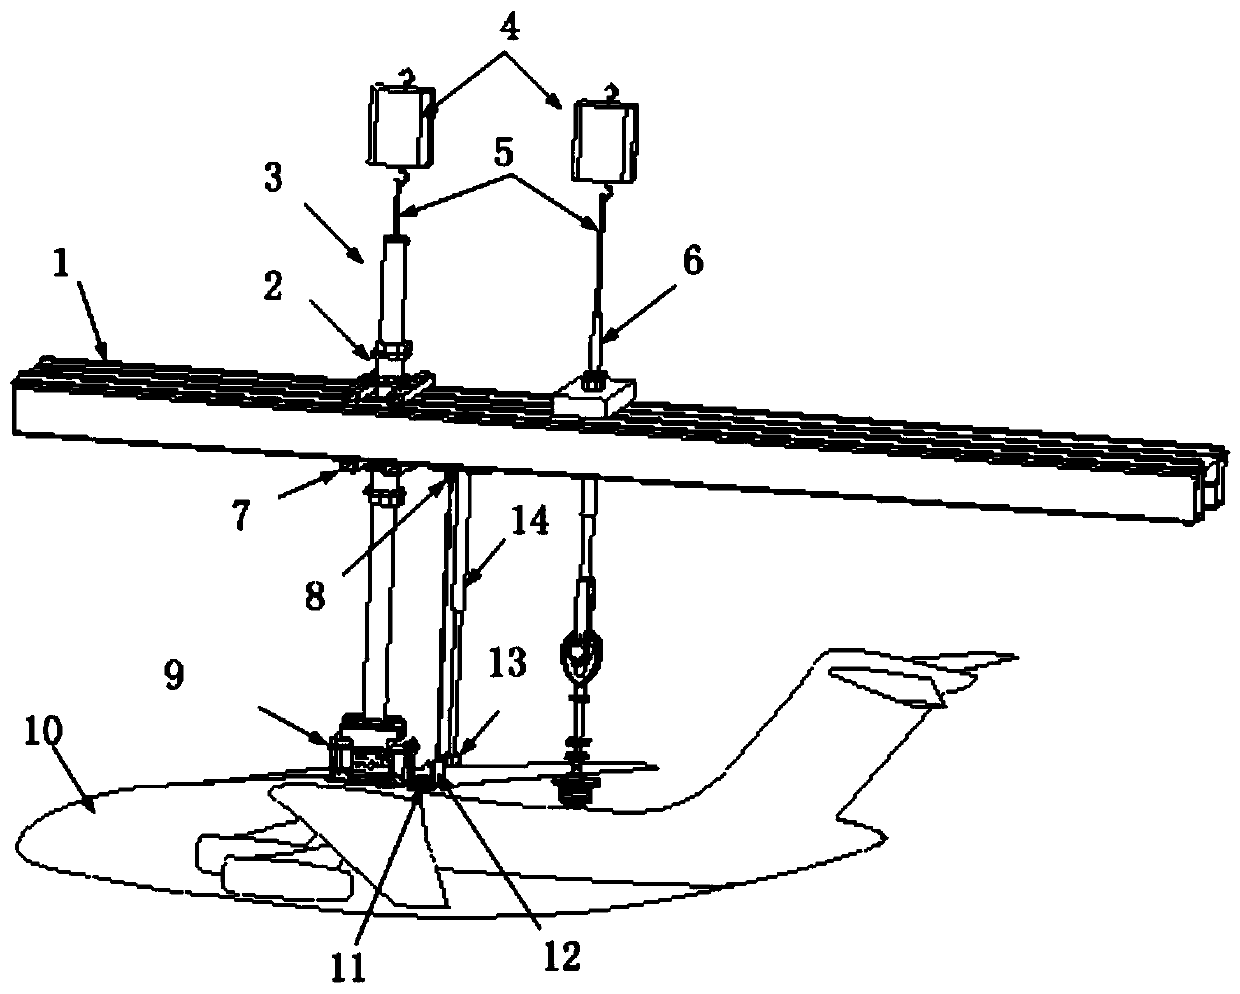 Aerodynamic lift resistance test device with controllable and adjustable pitch angle of airplane model